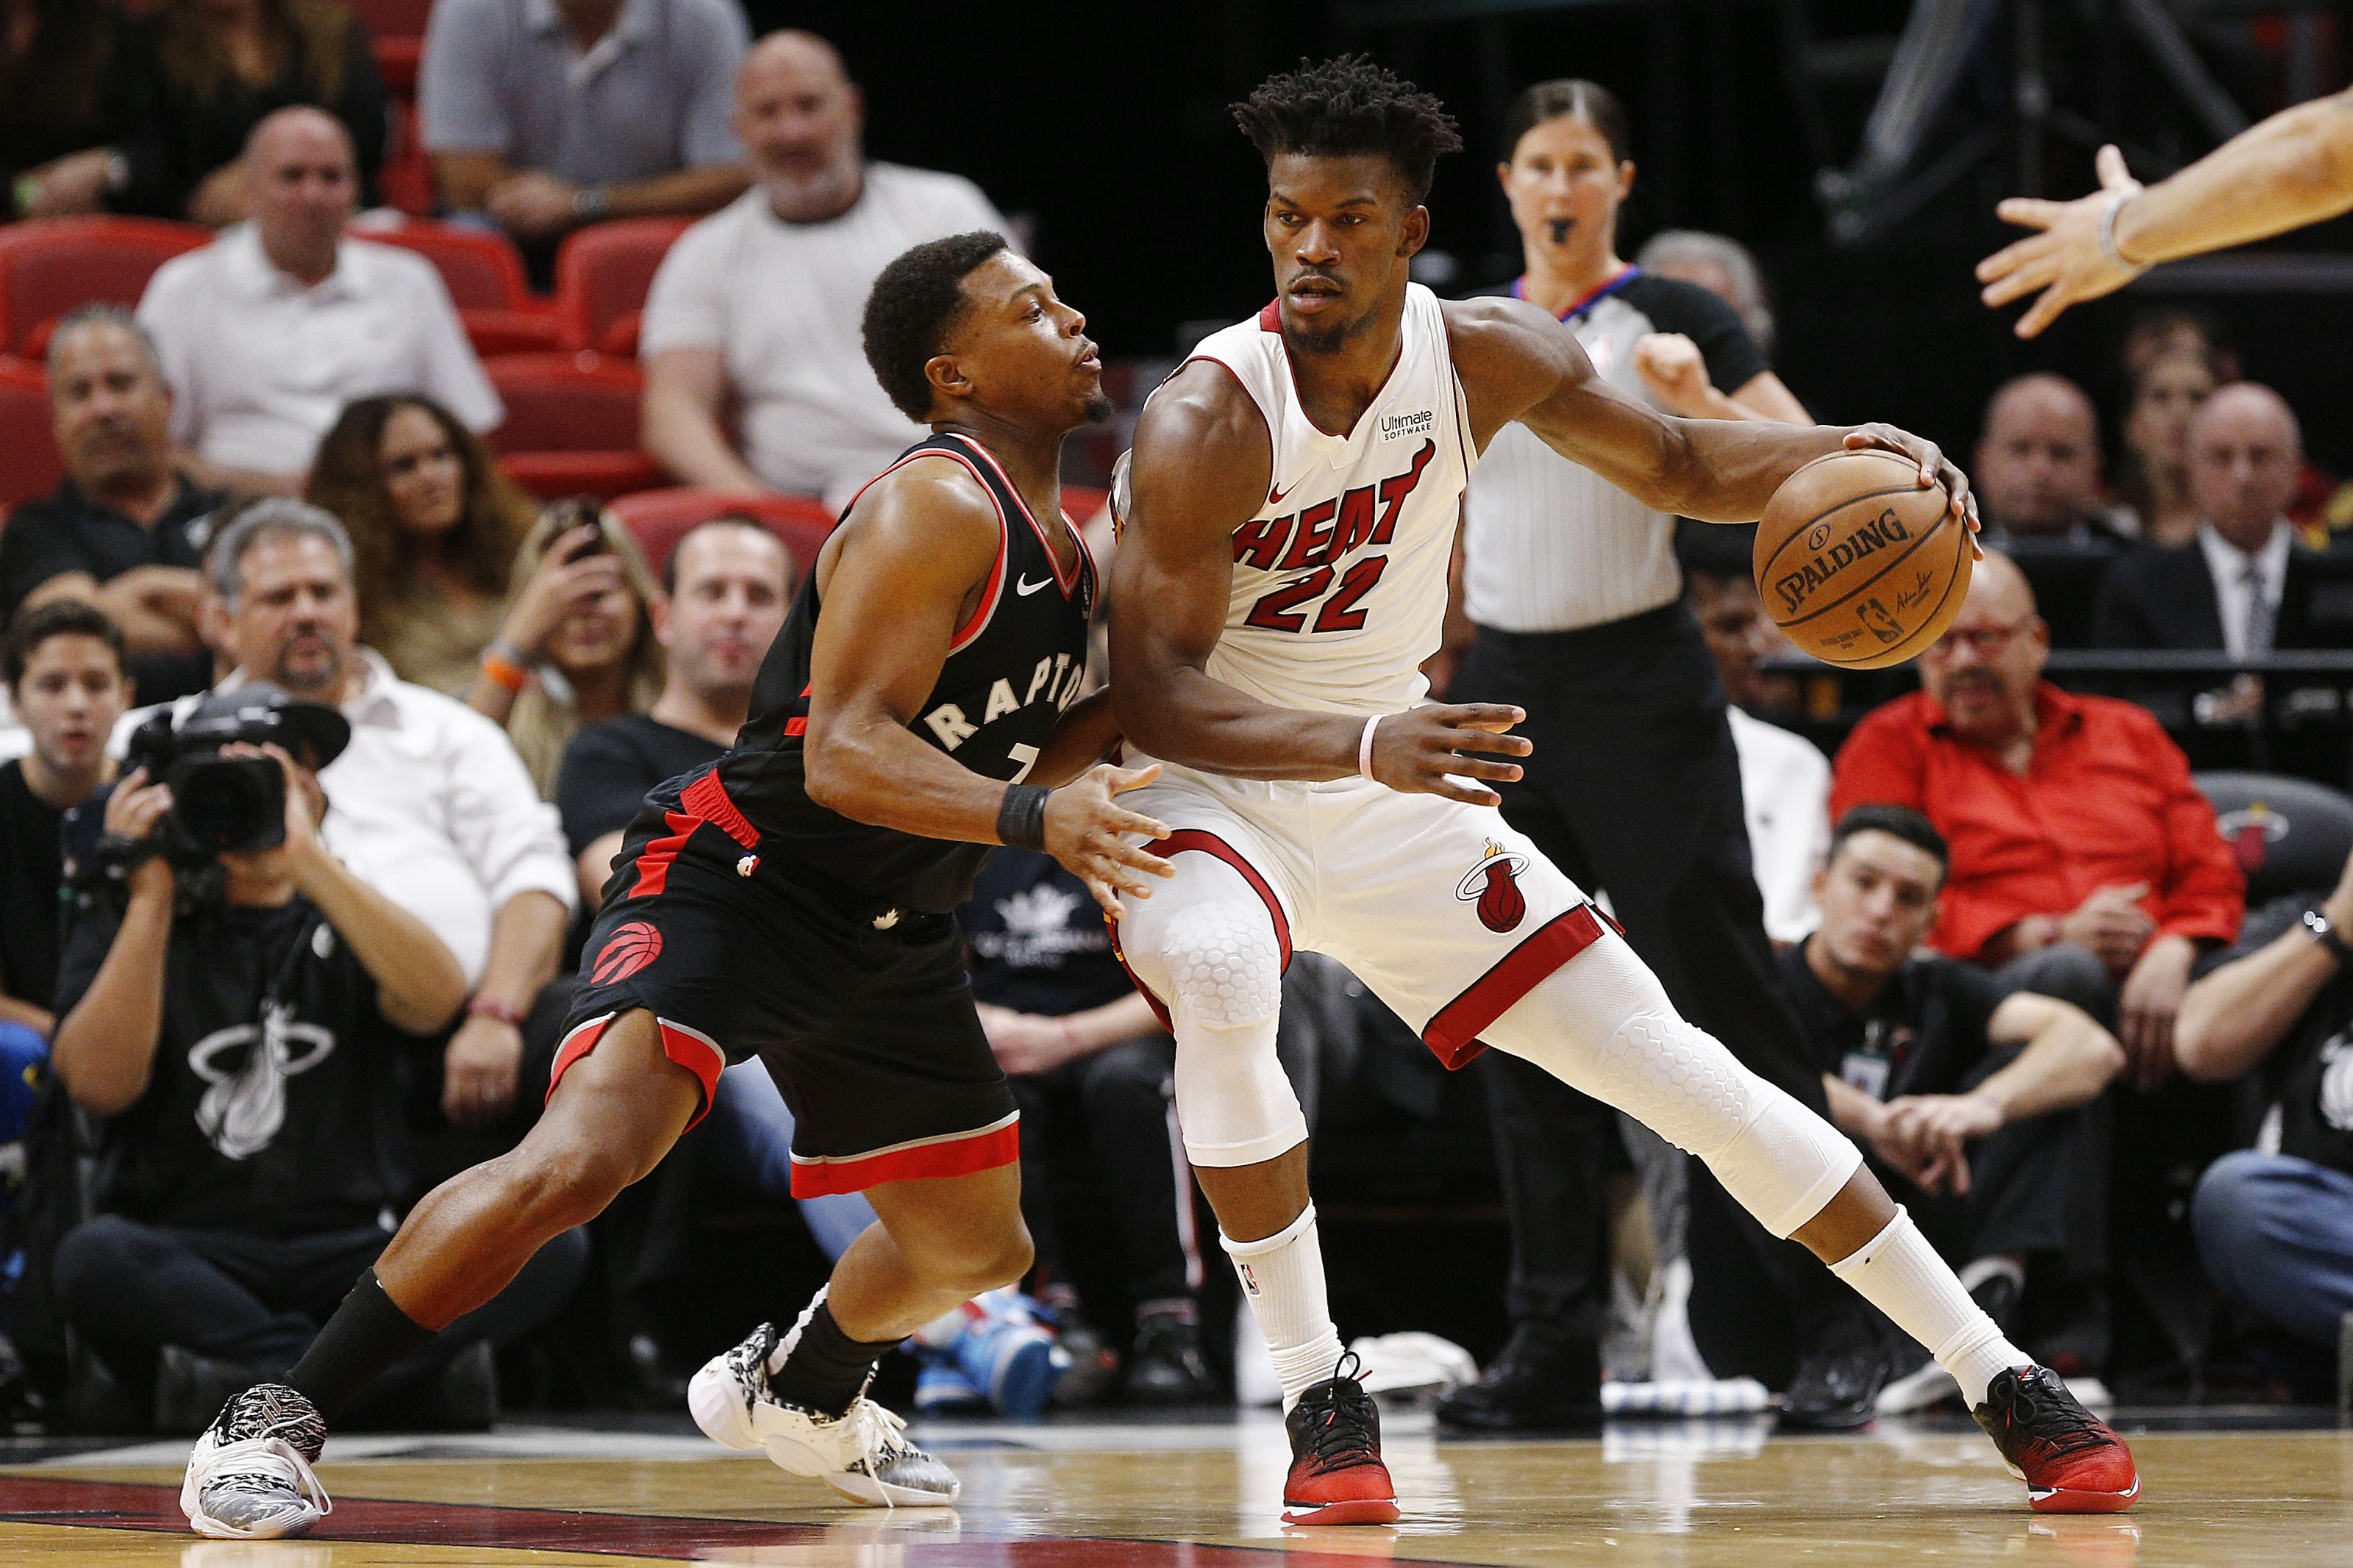 Can Kyle Lowry Help the Heat Re-Emerge as a Contender?